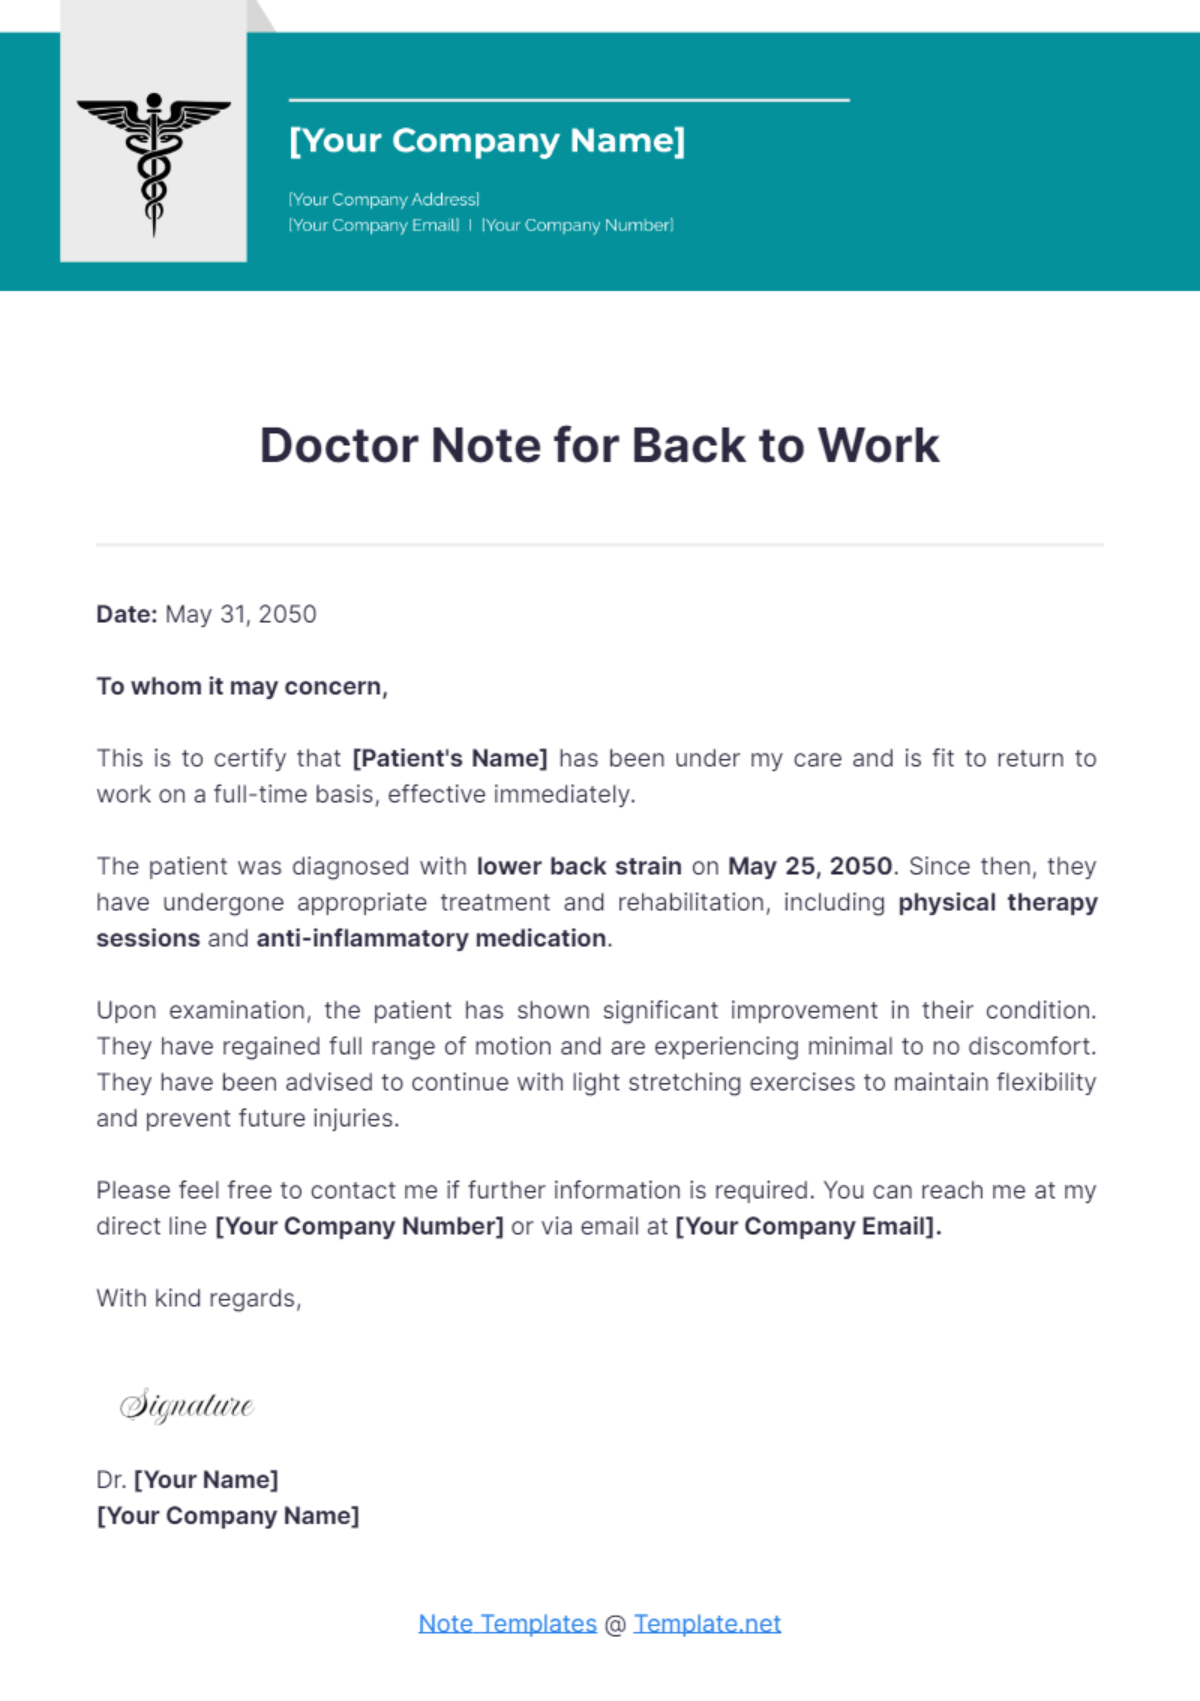 Free Doctor Note For Back To Work Template